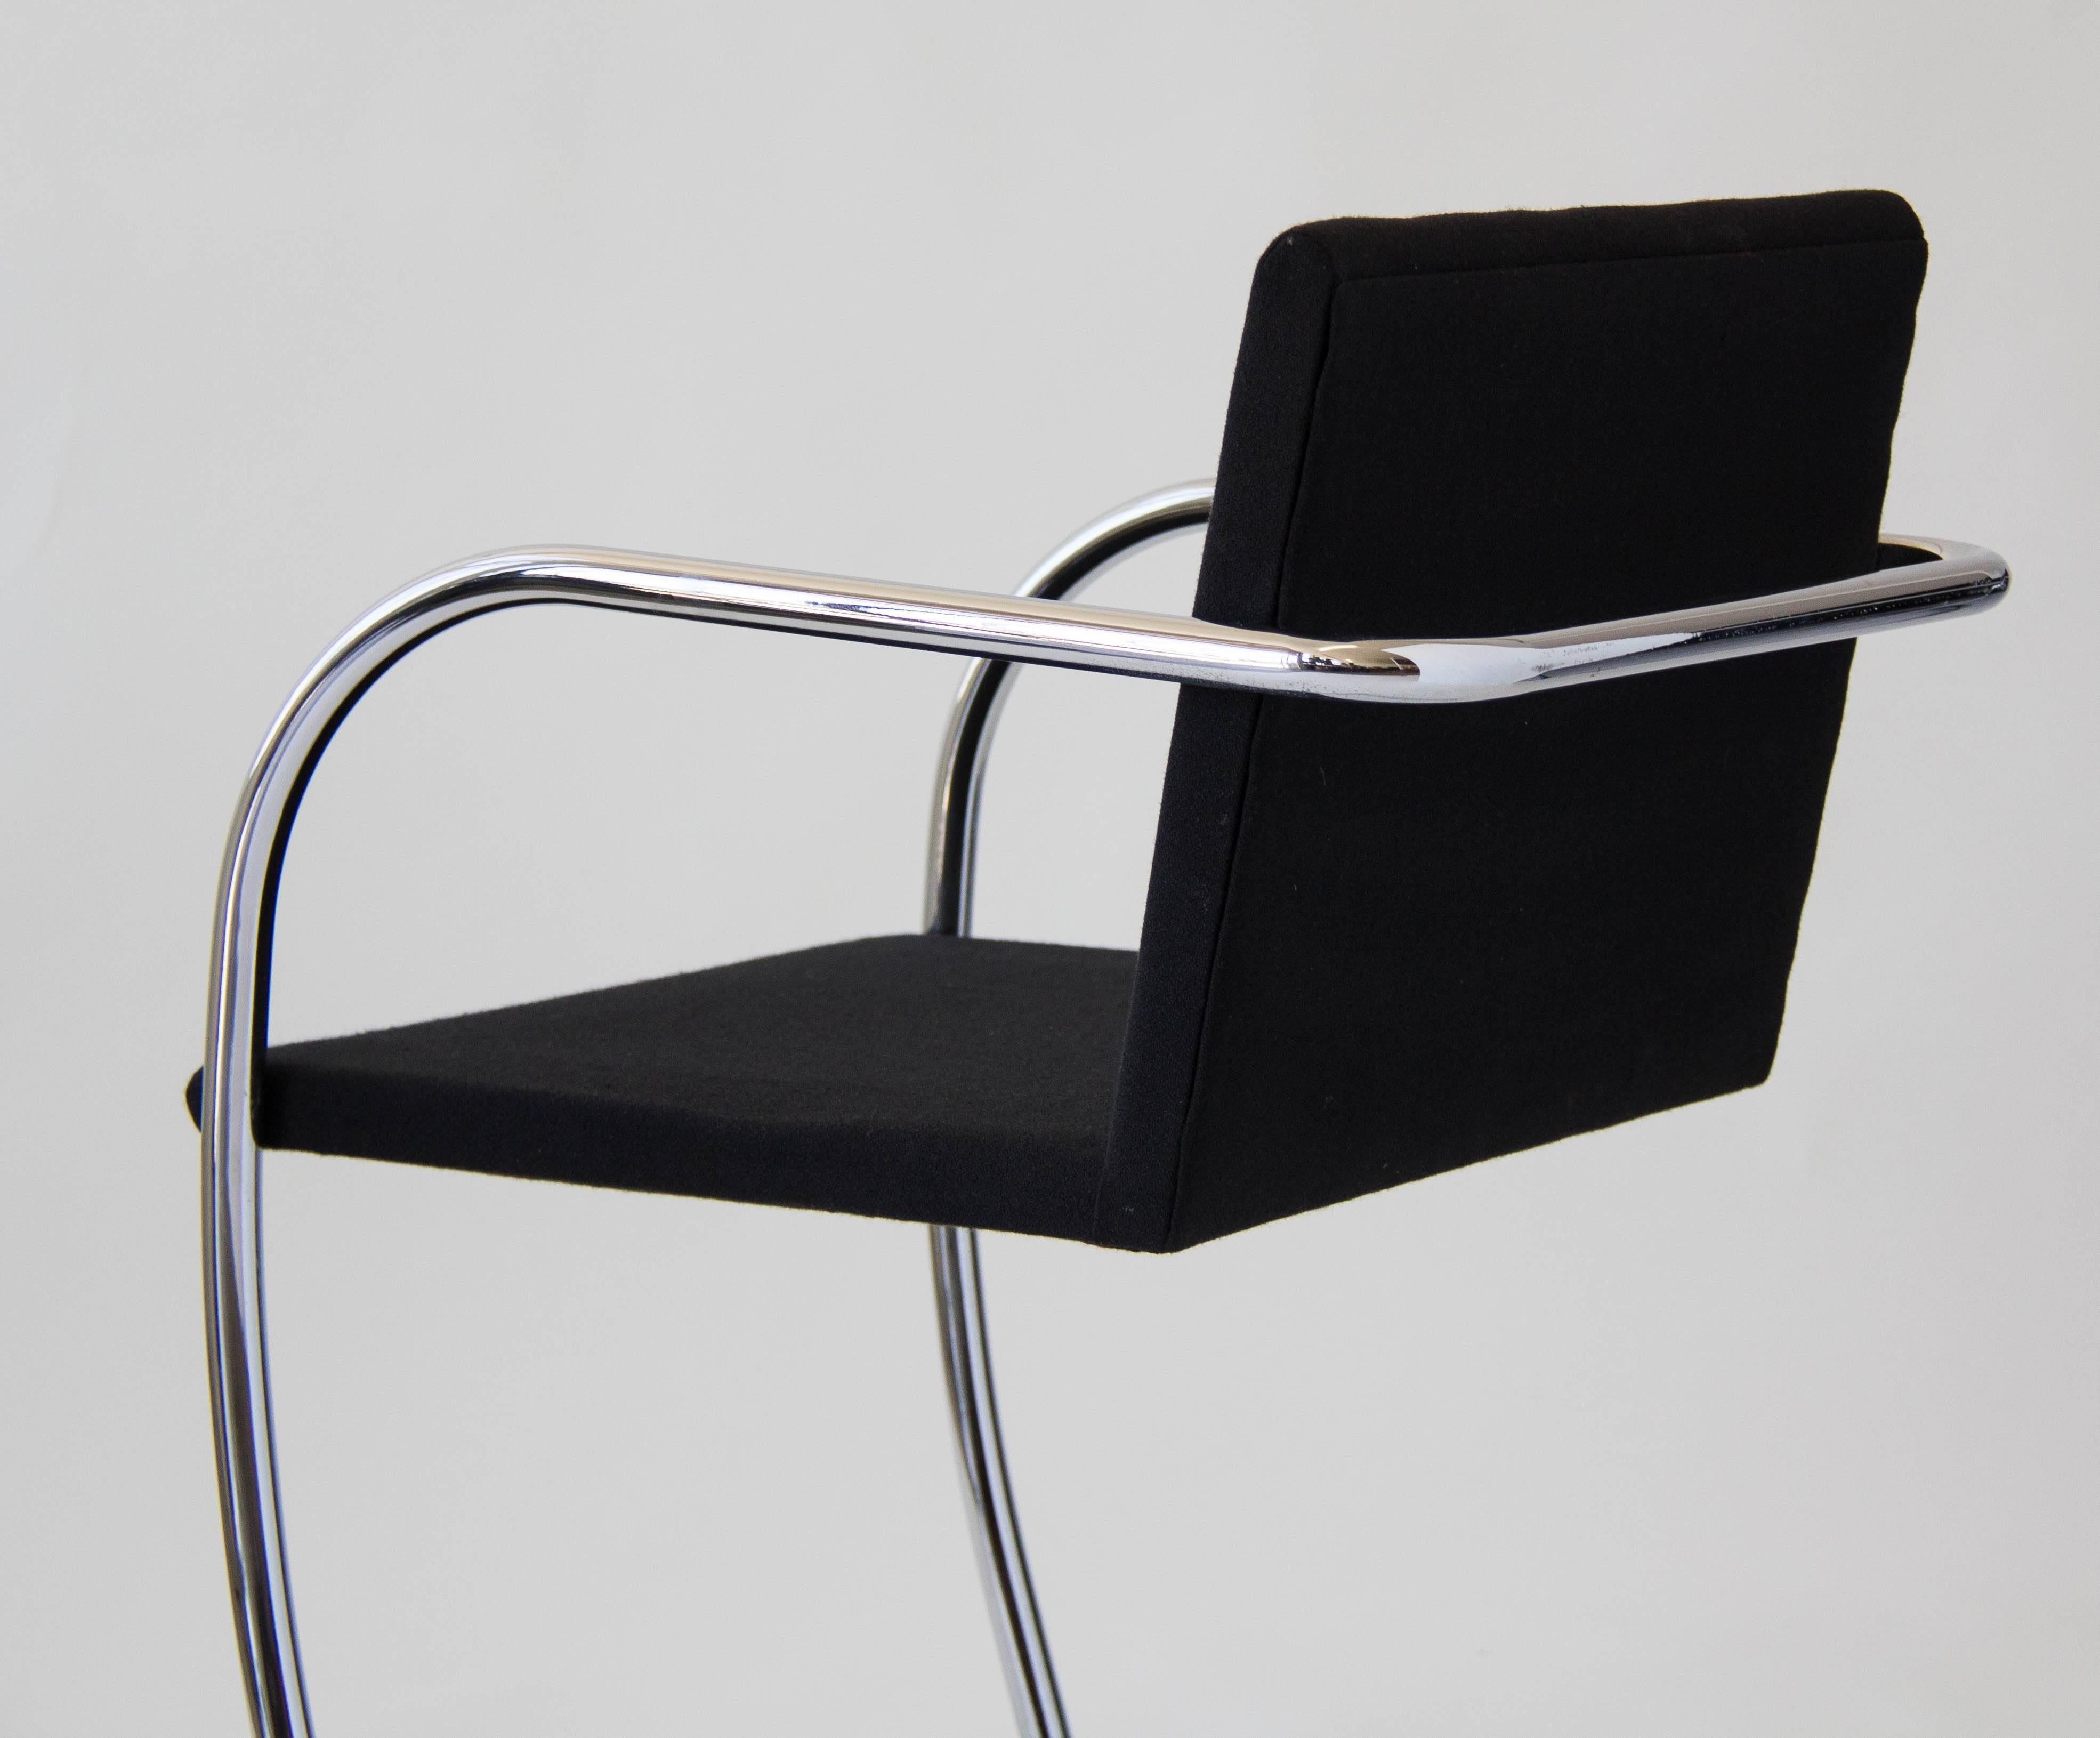 Steel Tubular Brno Chairs by Mies van der Rohe for Knoll International